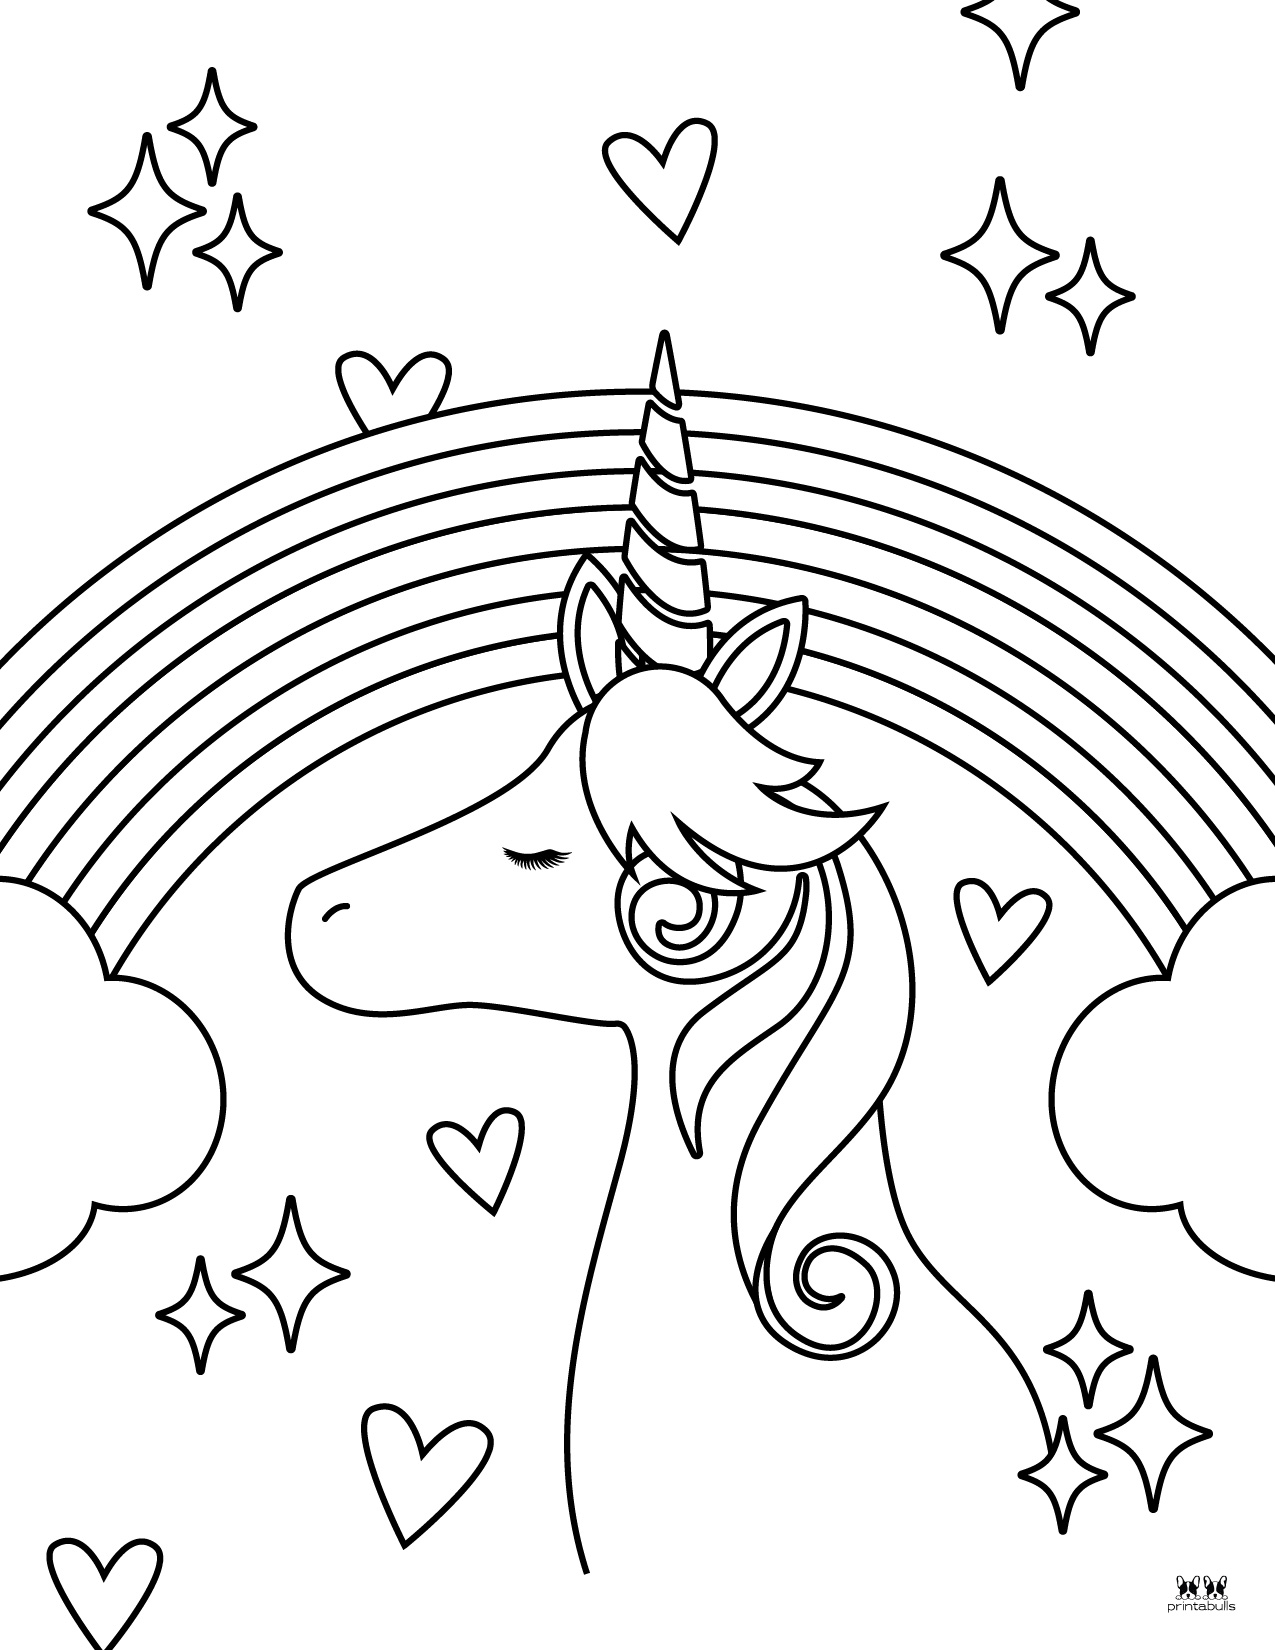 Free Coloring Pages With Rainbows Free Printable Rain - vrogue.co